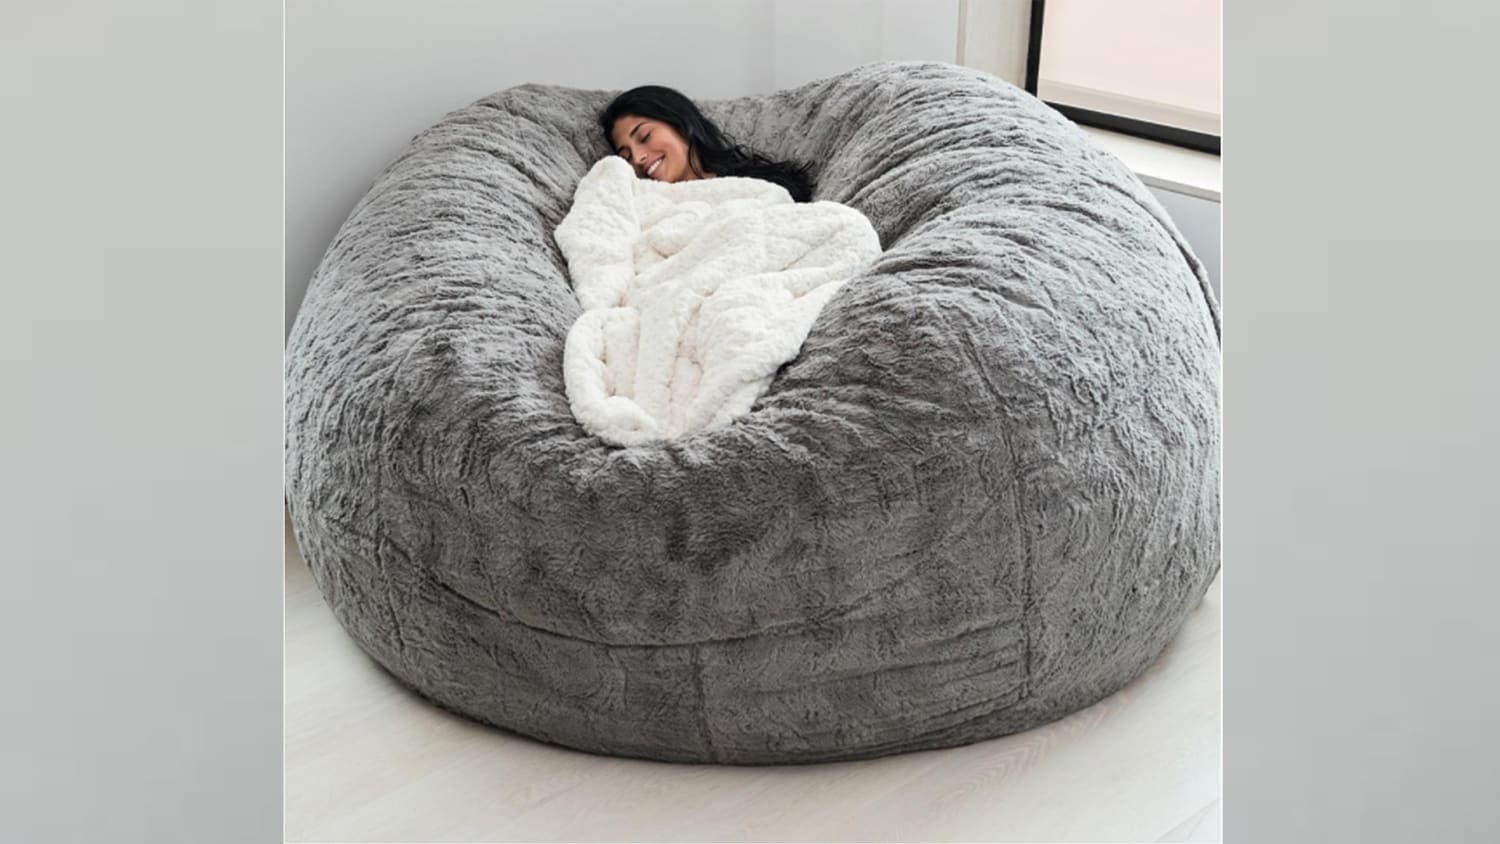 Lovesac Pillow And Other Comfy Chairs, Bean Bag Chairs Like Lovesac